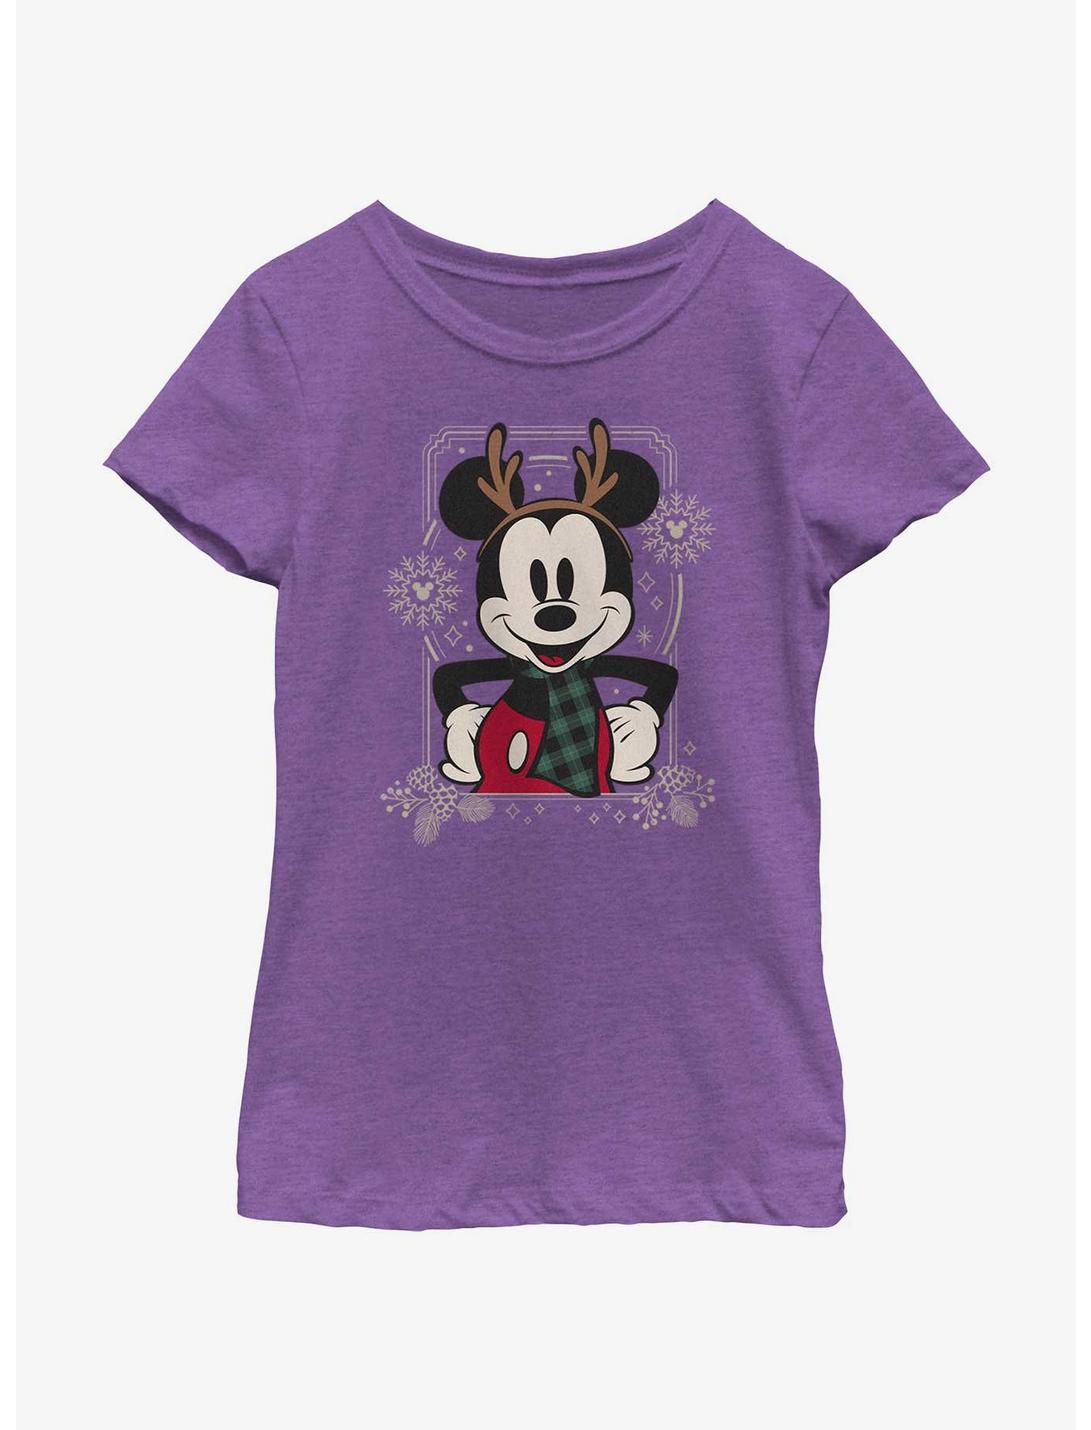 Disney Mickey Mouse Winter Ready Youth Girls T-Shirt, PURPLE BERRY, hi-res